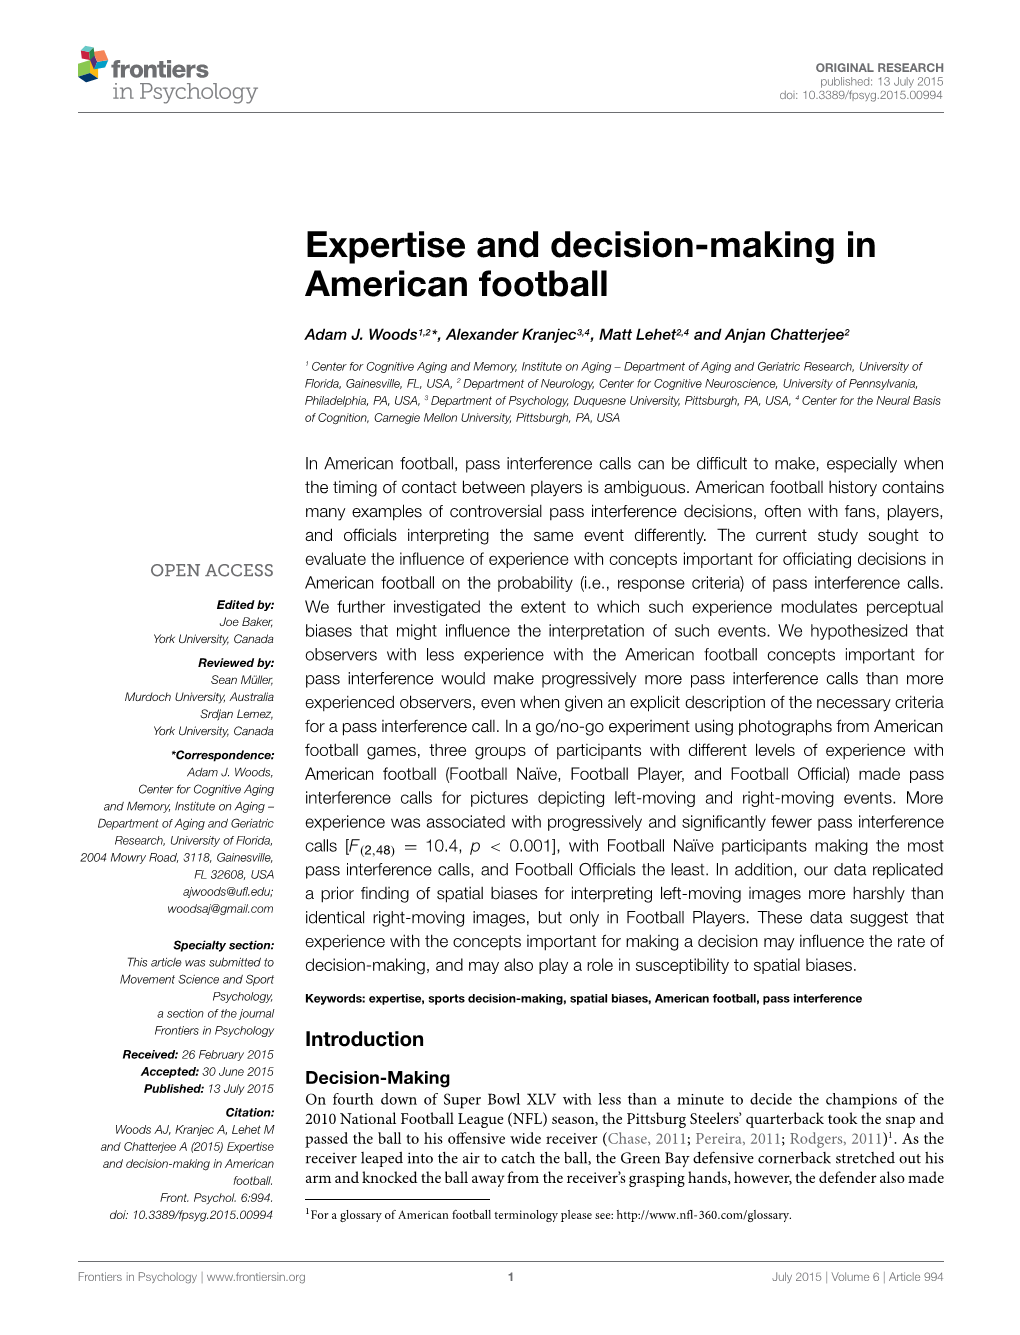 Expertise and Decision-Making in American Football